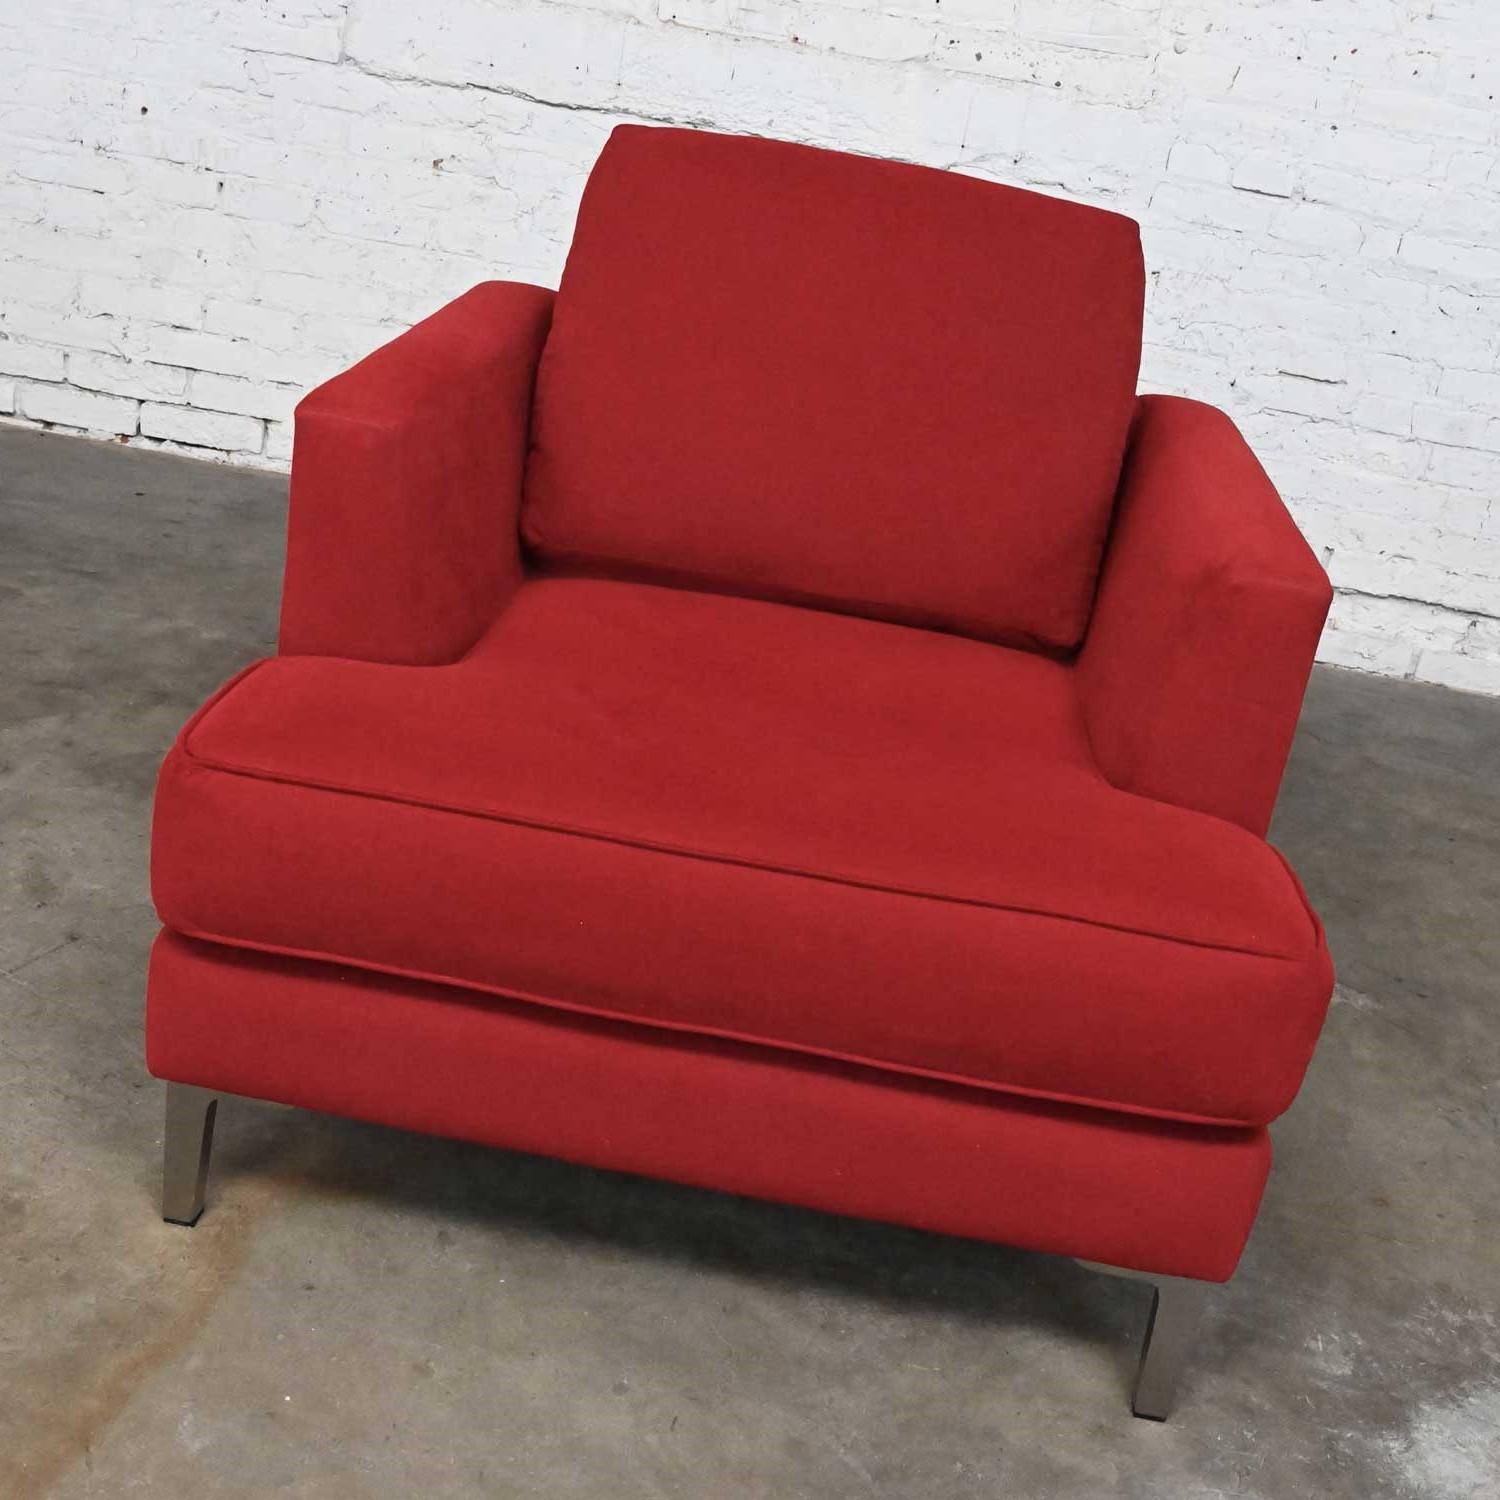 Modern Carter Club Chair Attr Zen Collection Bright Red with Polished Steel Legs 1